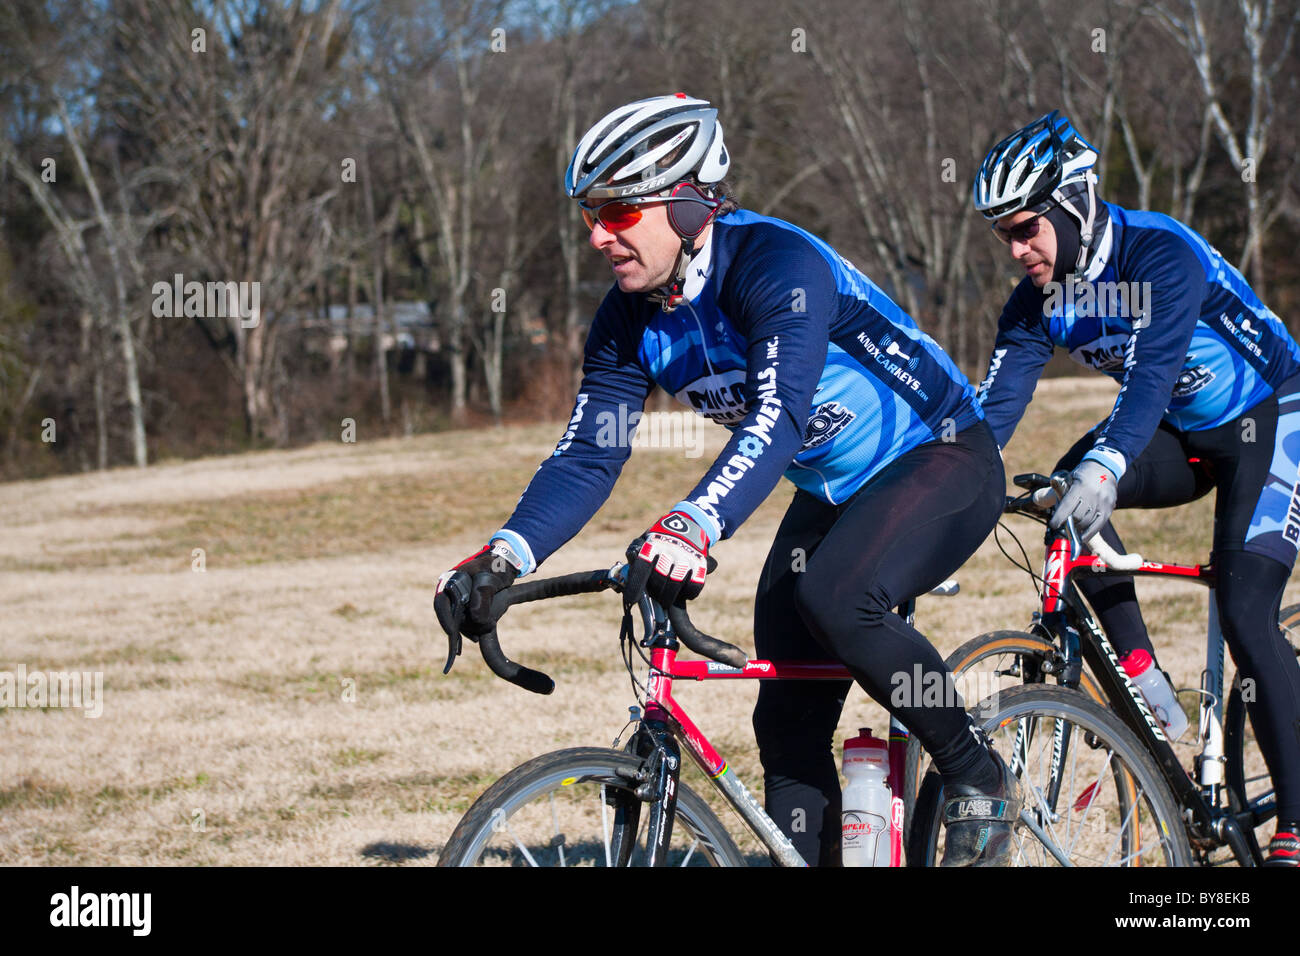 Cyclers from various teams compete during the Knoxiecross cyclocross series Stock Photo